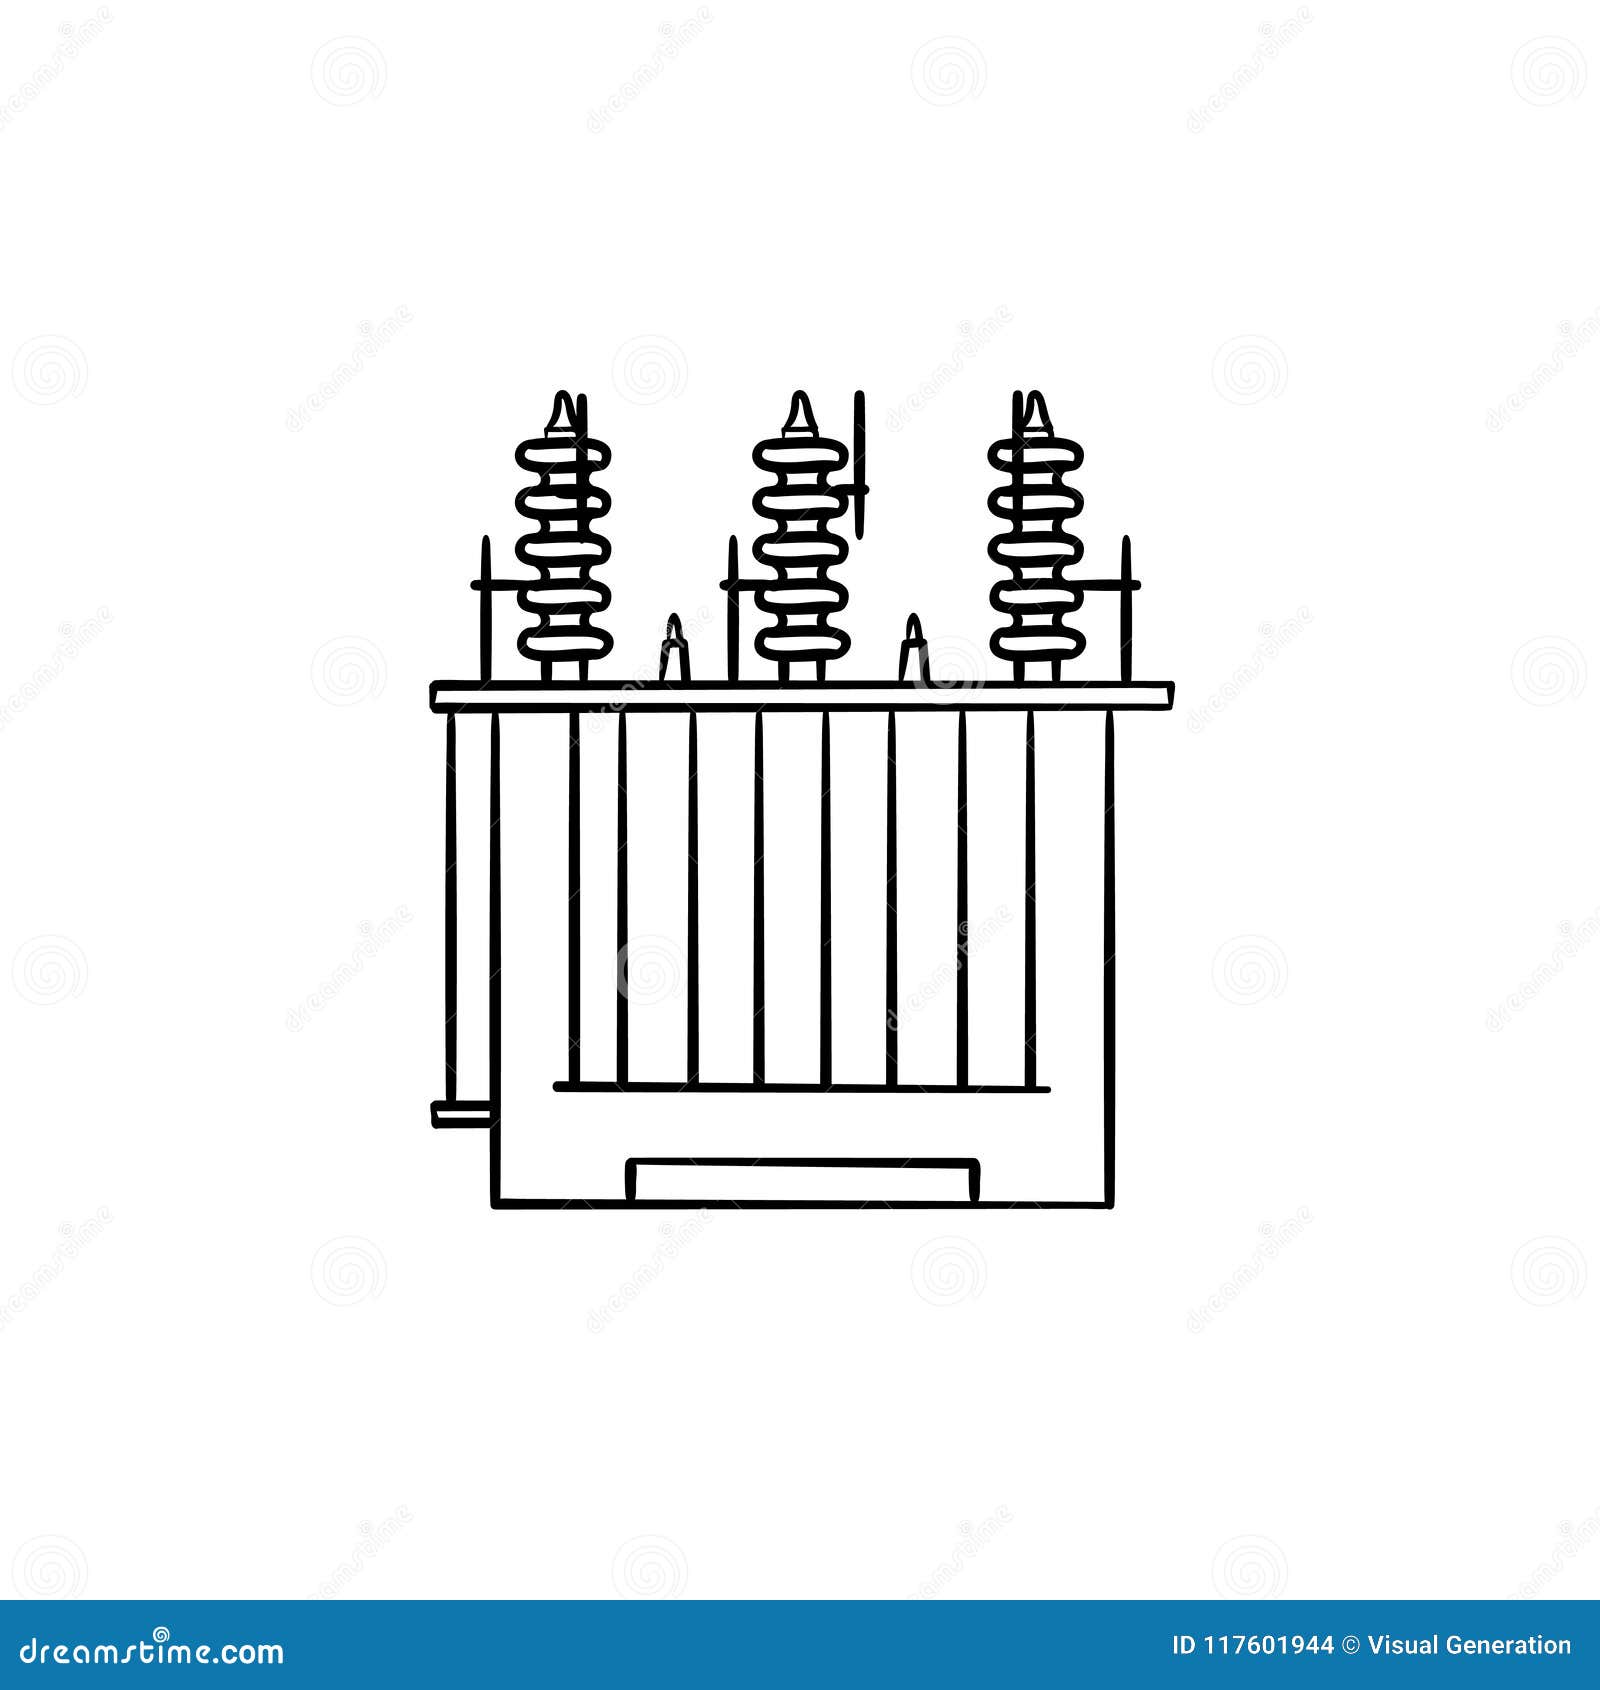 Electrical Voltage Transformer Hand Drawn Outline Doodle Icon